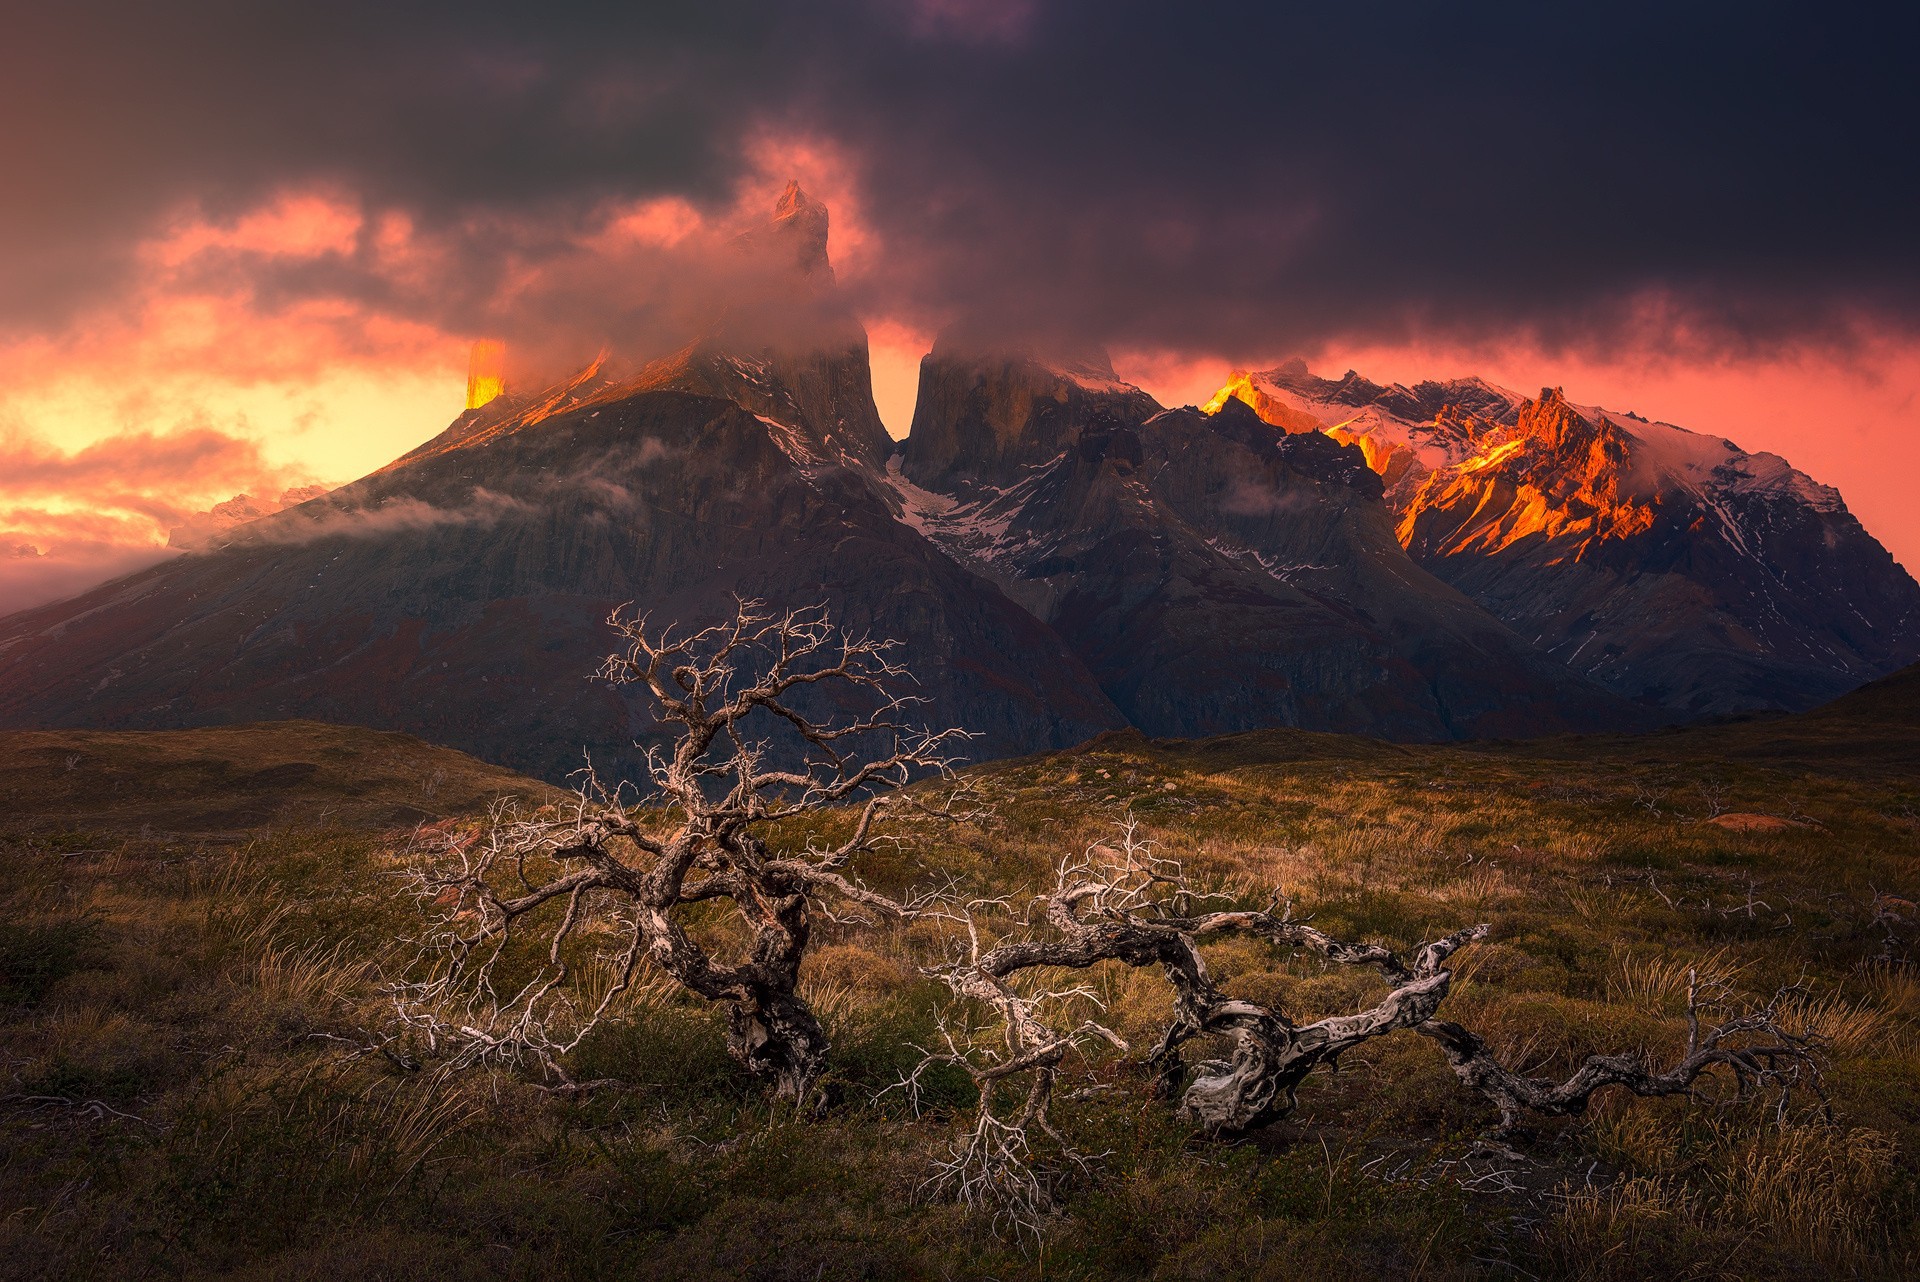 Mountainous terrain Patagonia wallpapers and images - wallpapers ...